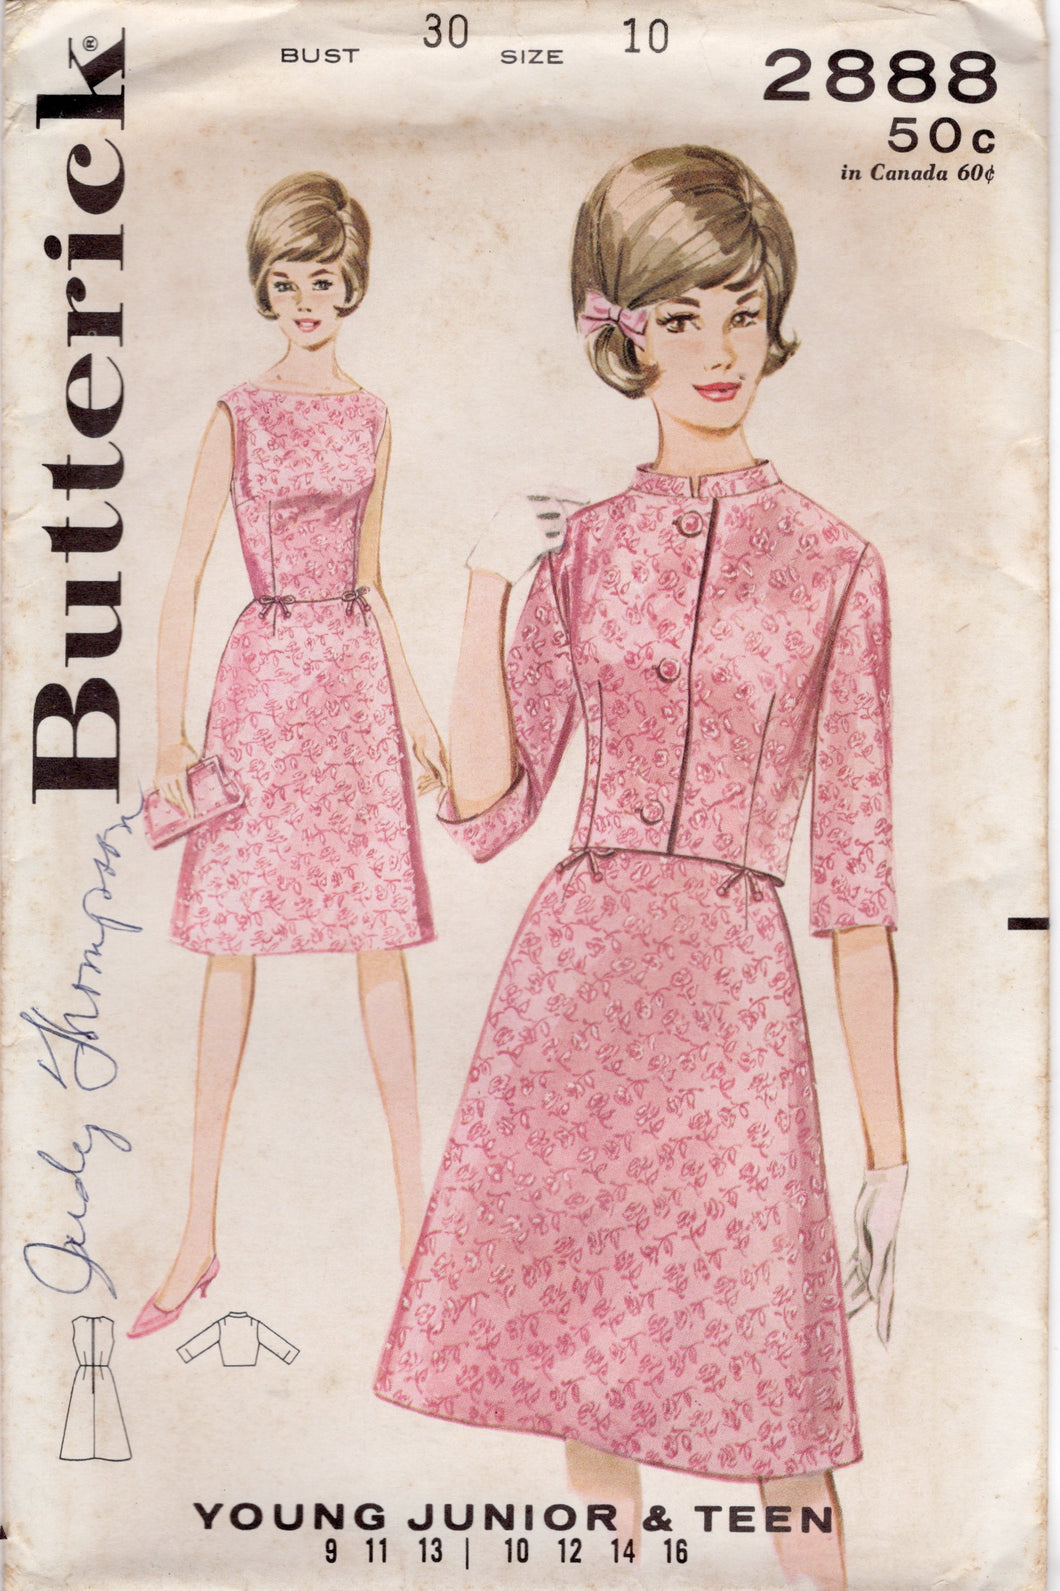 1960's Butterick One Piece Dress with Boat Neckline and Bolero with Mandarin Collar - Bust 30